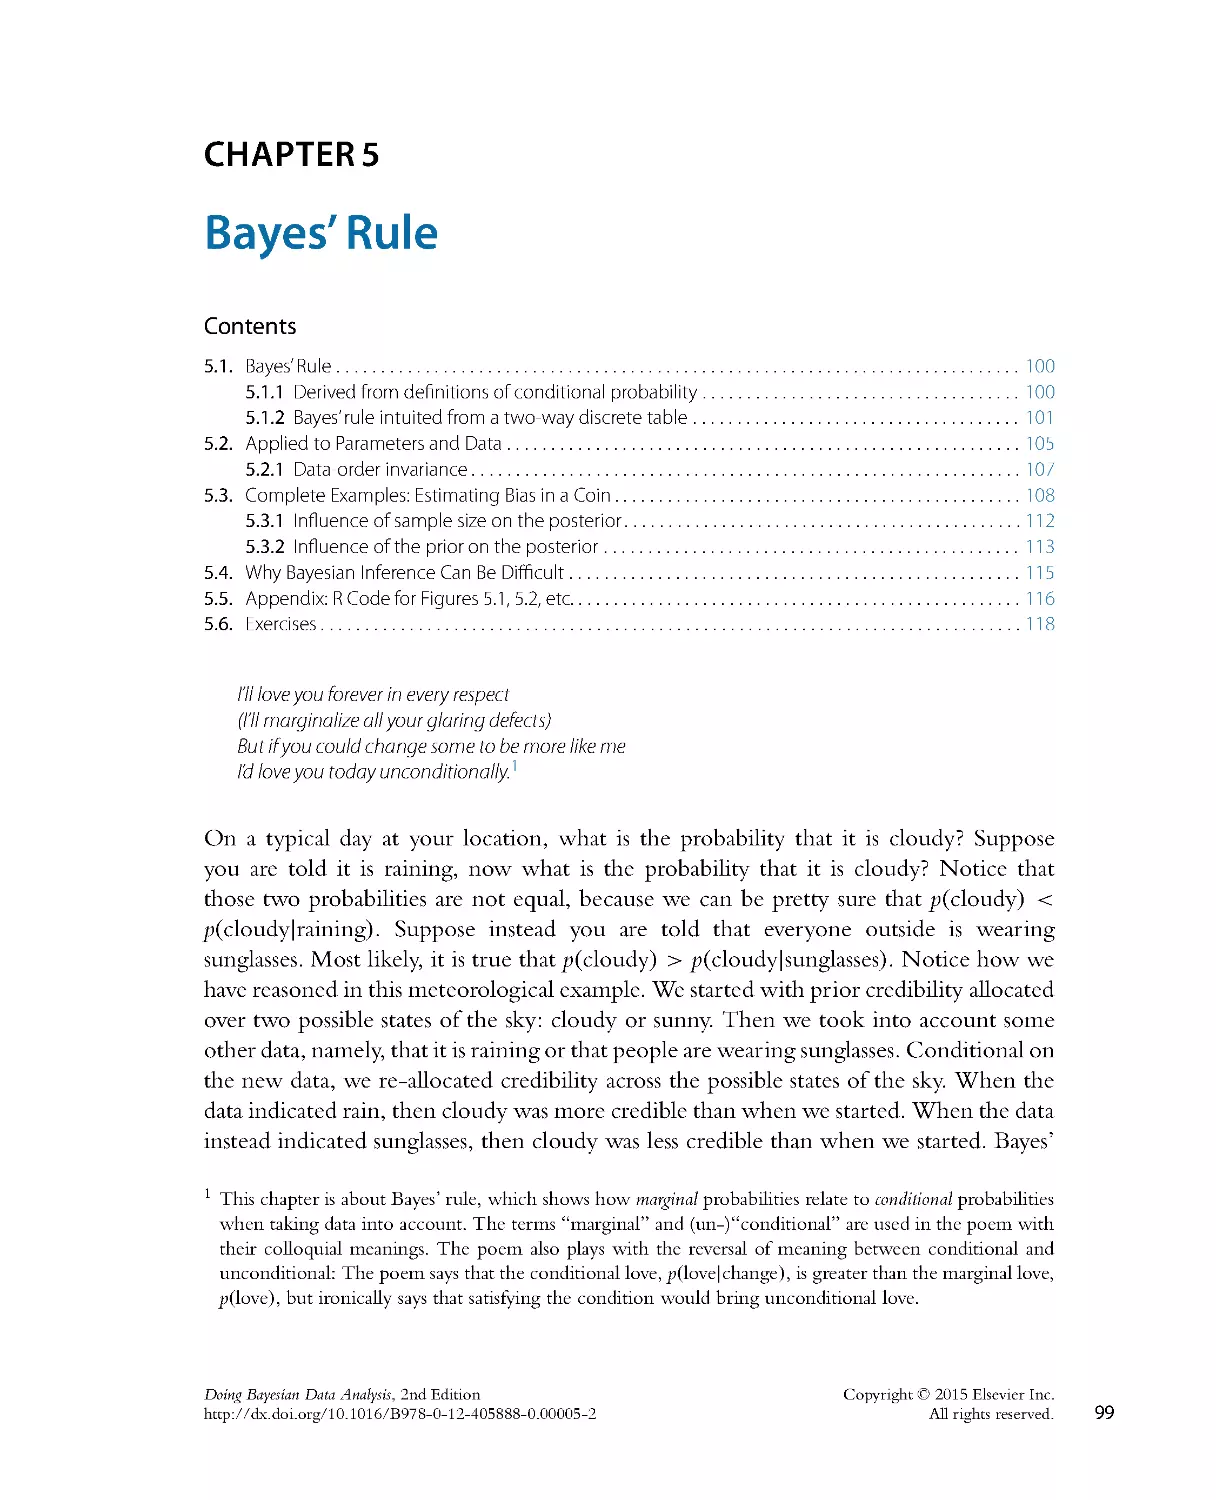 9. Chapter-5-Bayes-Rule_2015_Doing-Bayesian-Data-Analysis-Second-Edition-